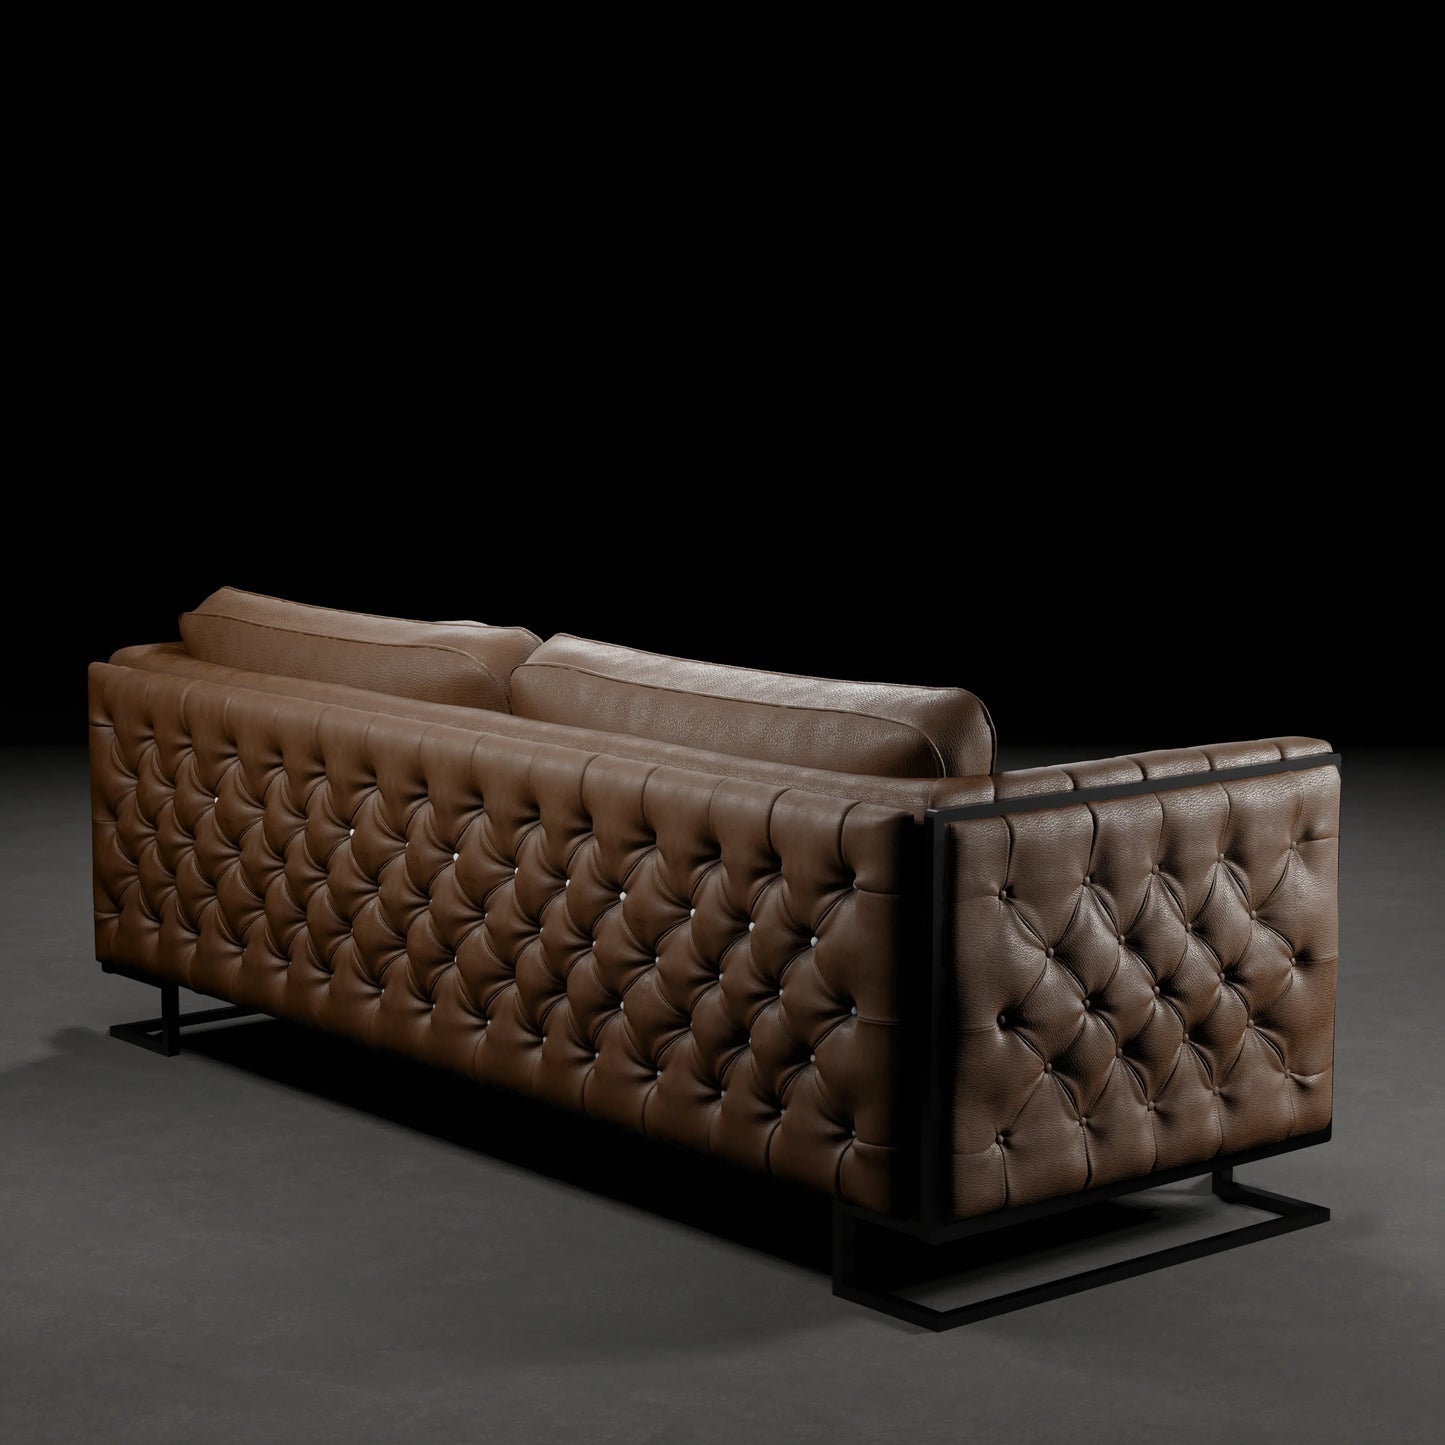 CAROLINA - 4 Seater Couch in Leather Finish | Almond Brown Colour